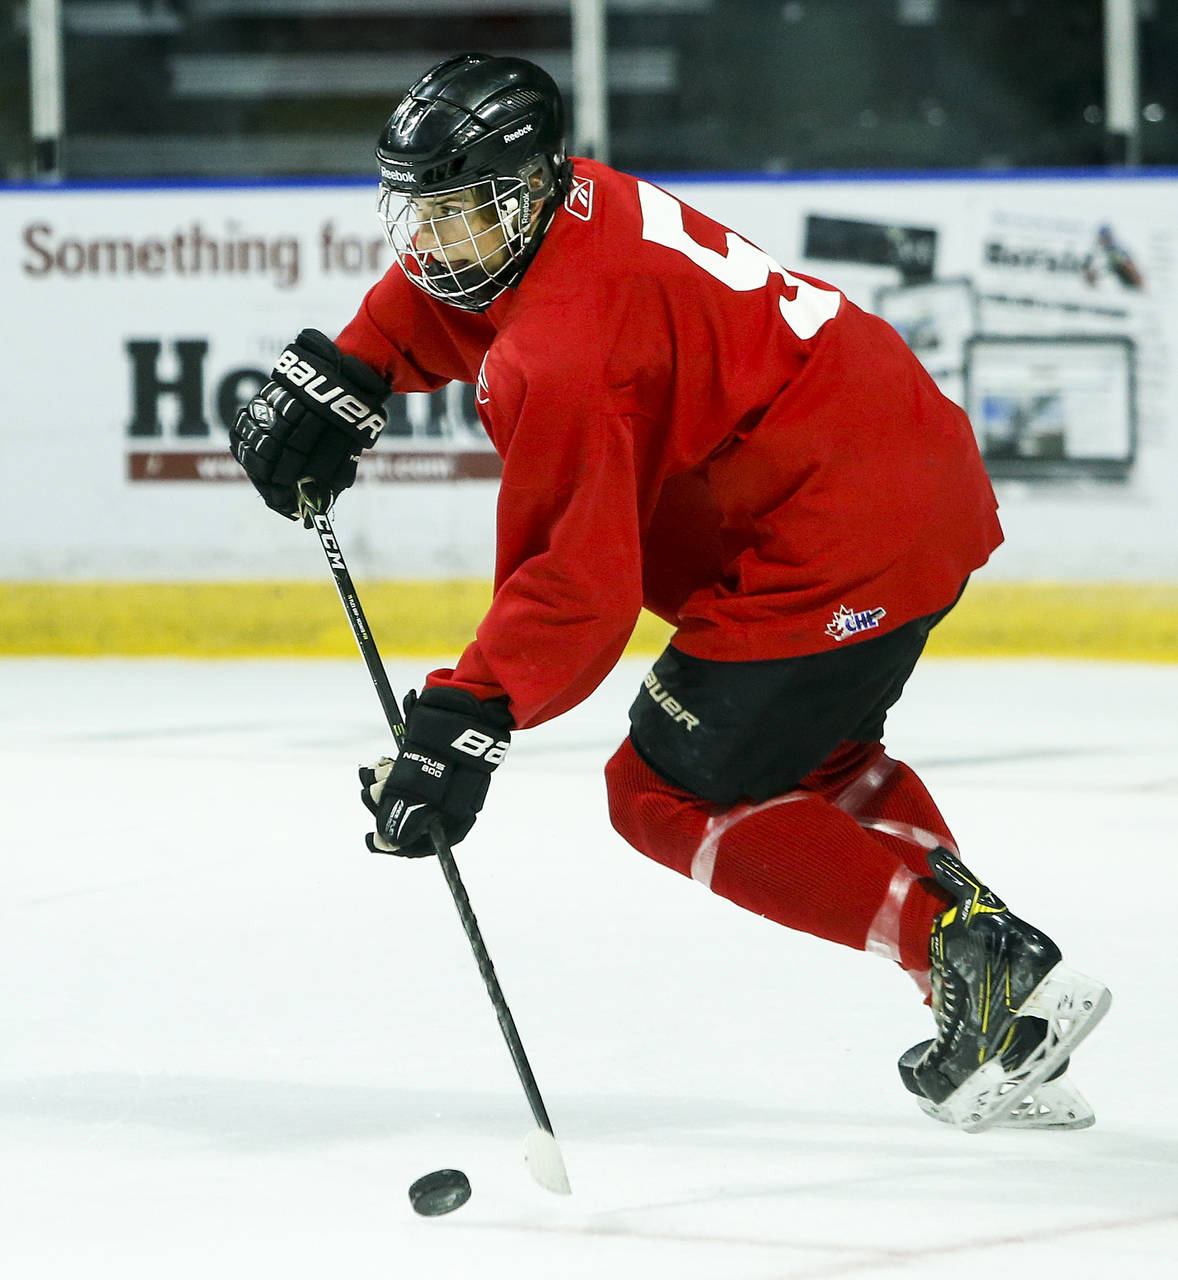 Silvertips prospect Ronan Seeley handles the puck during the second day of Everett’s training camp on Aug. 25, 2017, at Xfinity Arena. The Silvertips signed Seeley to a WHL standard player agreement on Tuesday. (Ian Terry / The Herald)